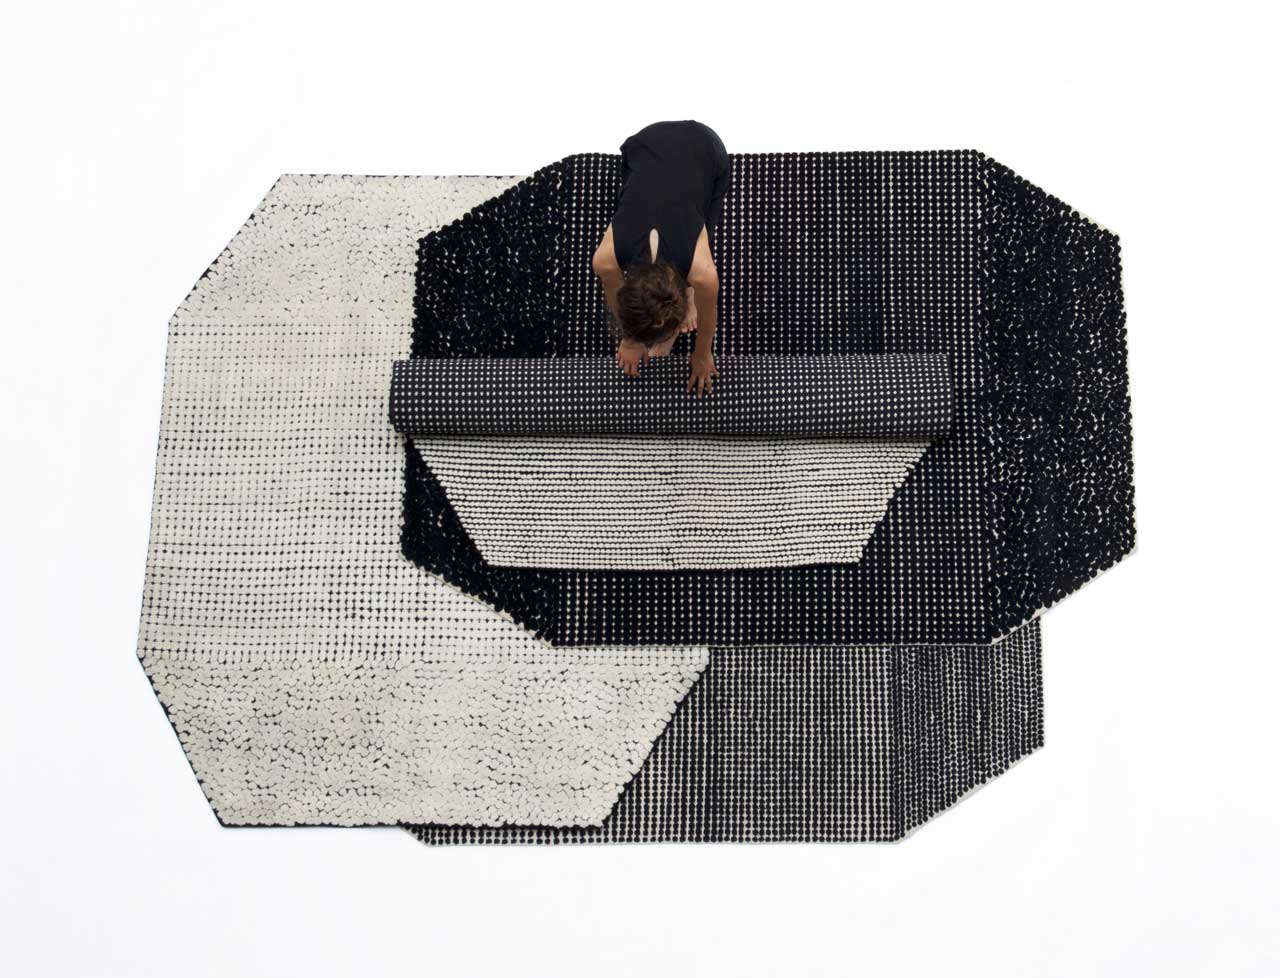 Semis Dotted Rug Collection by Ronan & Erwan Bouroullec for Danskina